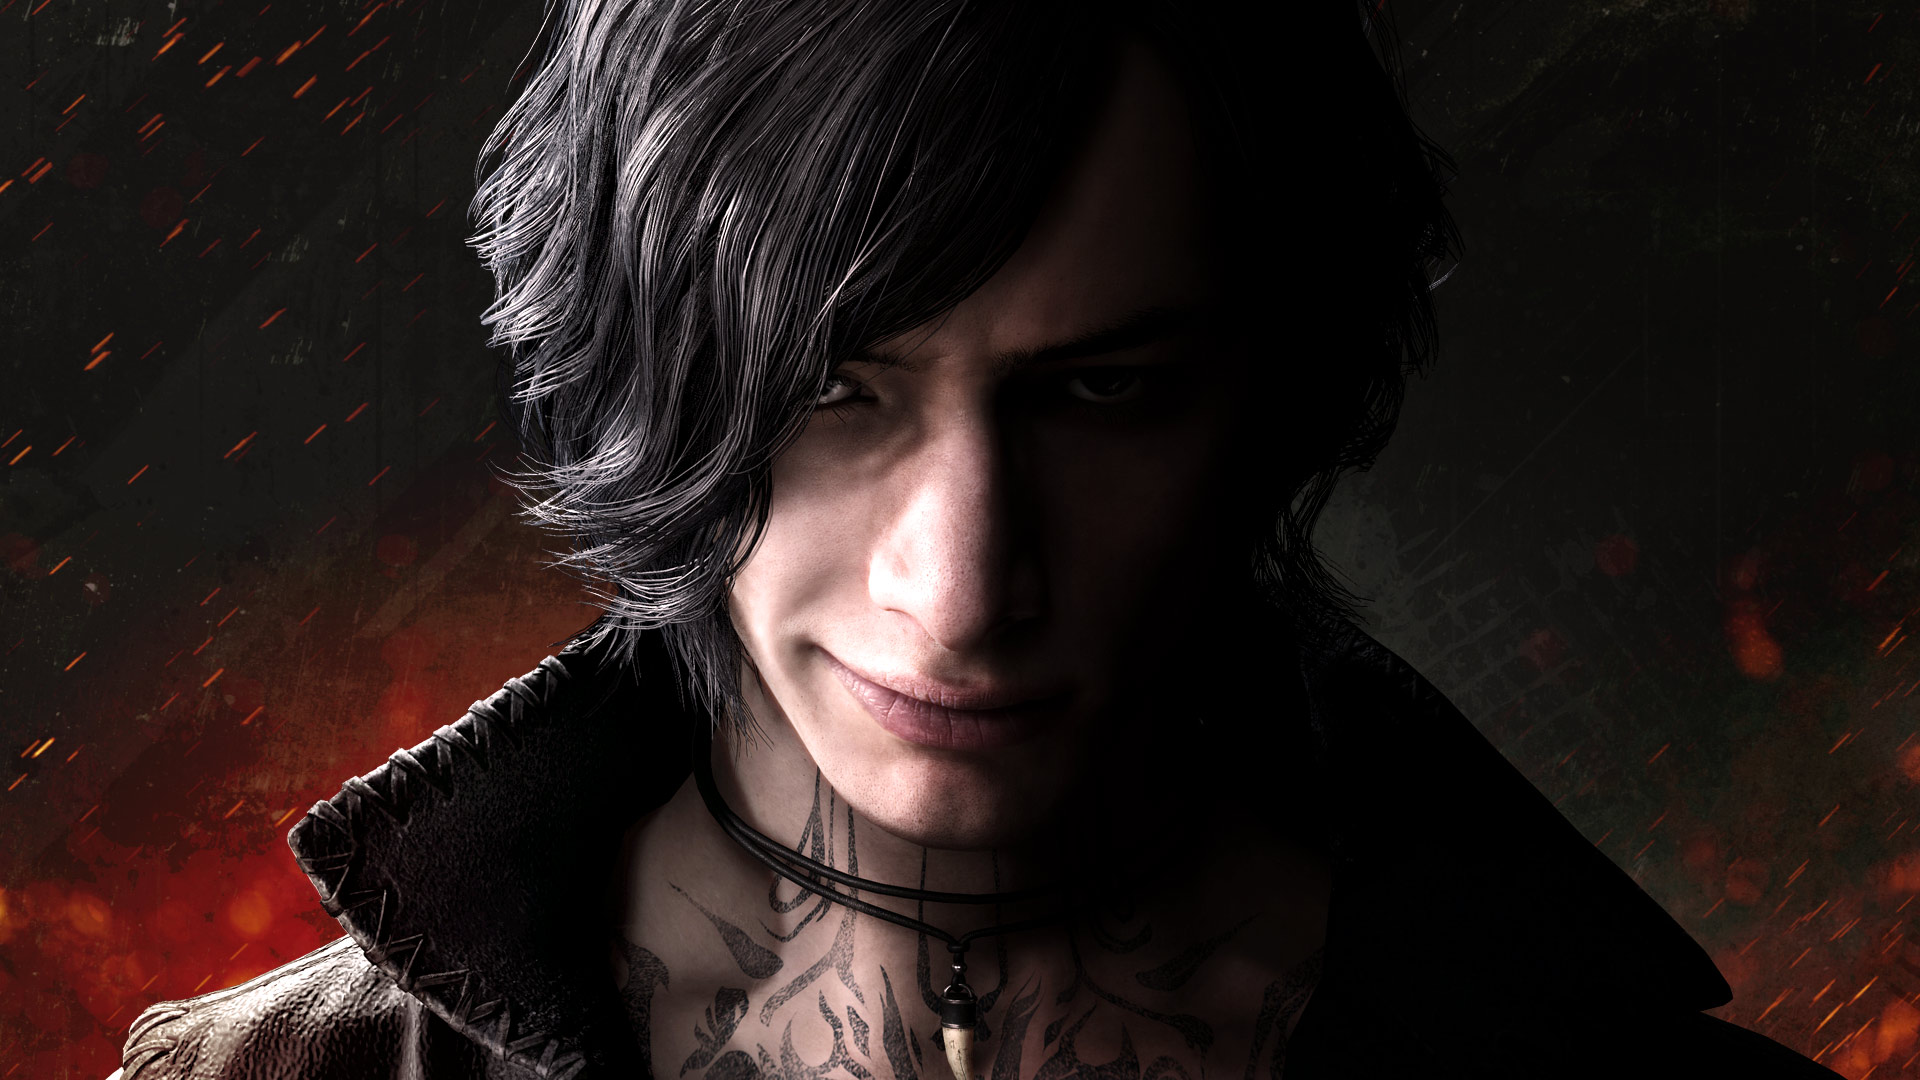 General 1920x1080 Devil May Cry 5 video games Capcom video game characters CGI video game boys smiling closeup Devil May Cry 3 video game art black hair tattoo simple background